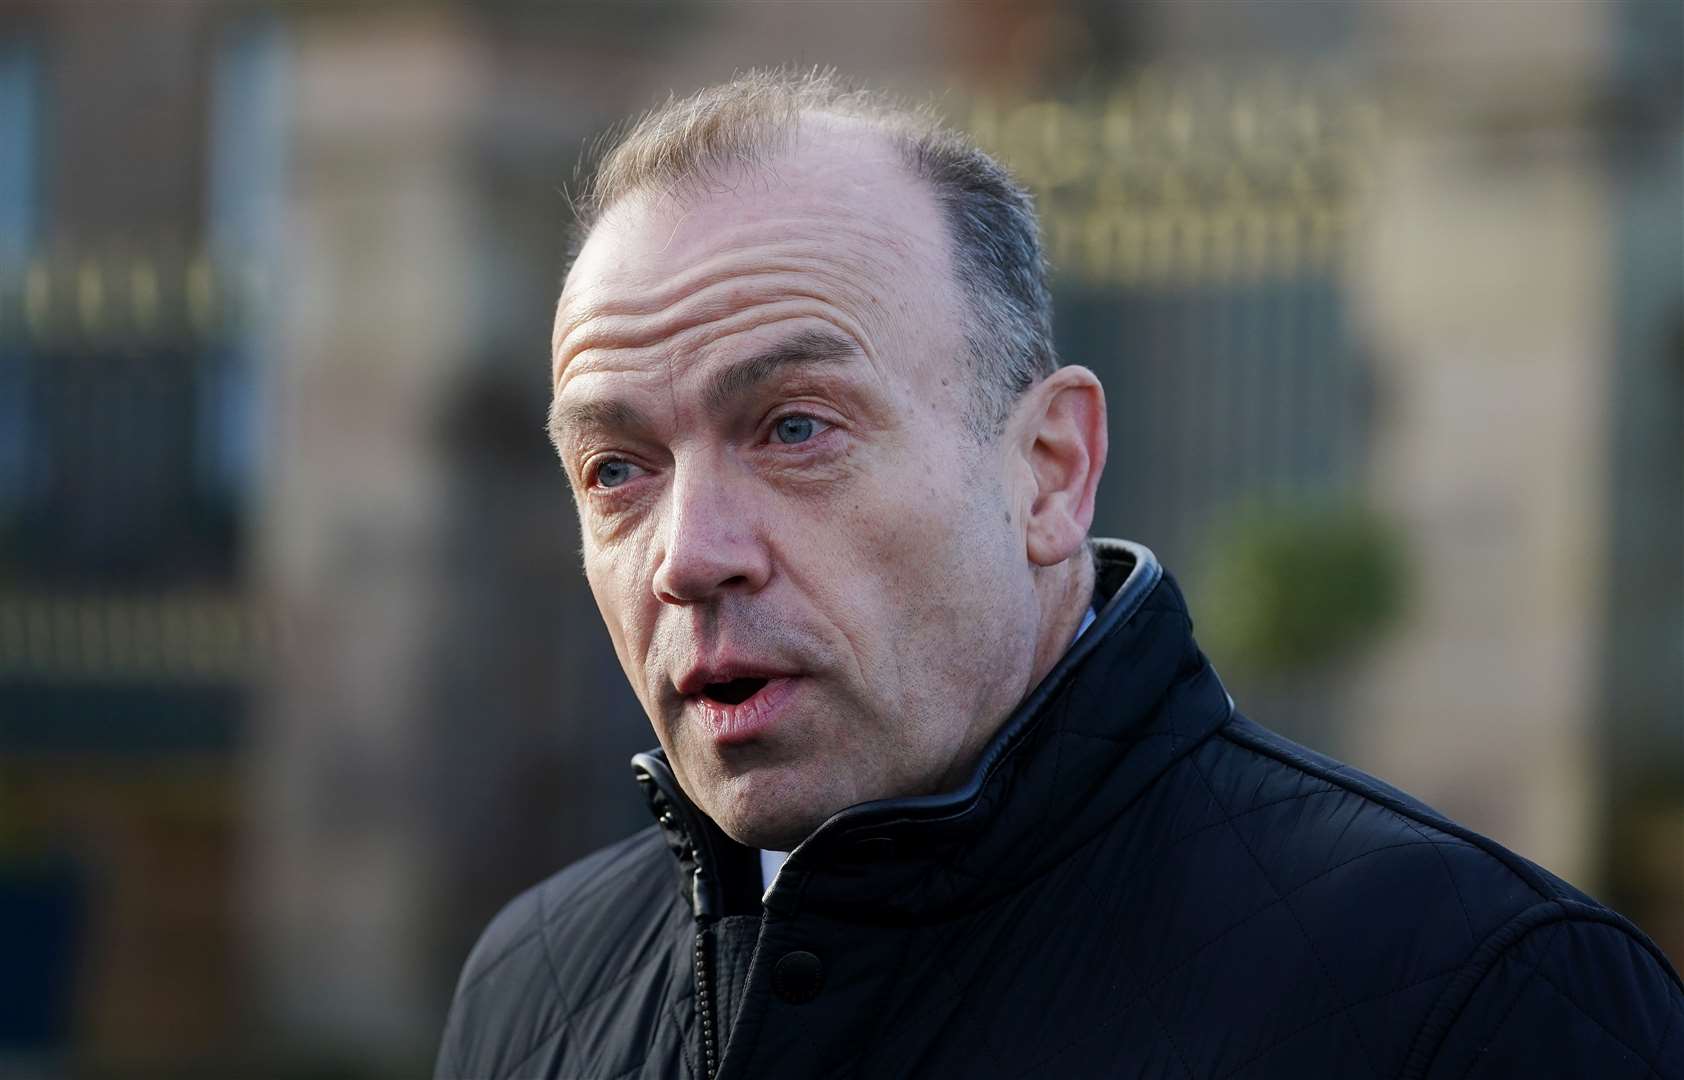 Northern Ireland Secretary Chris Heaton-Harris welcomed the funding announced for the region (Brian Lawless/PA)